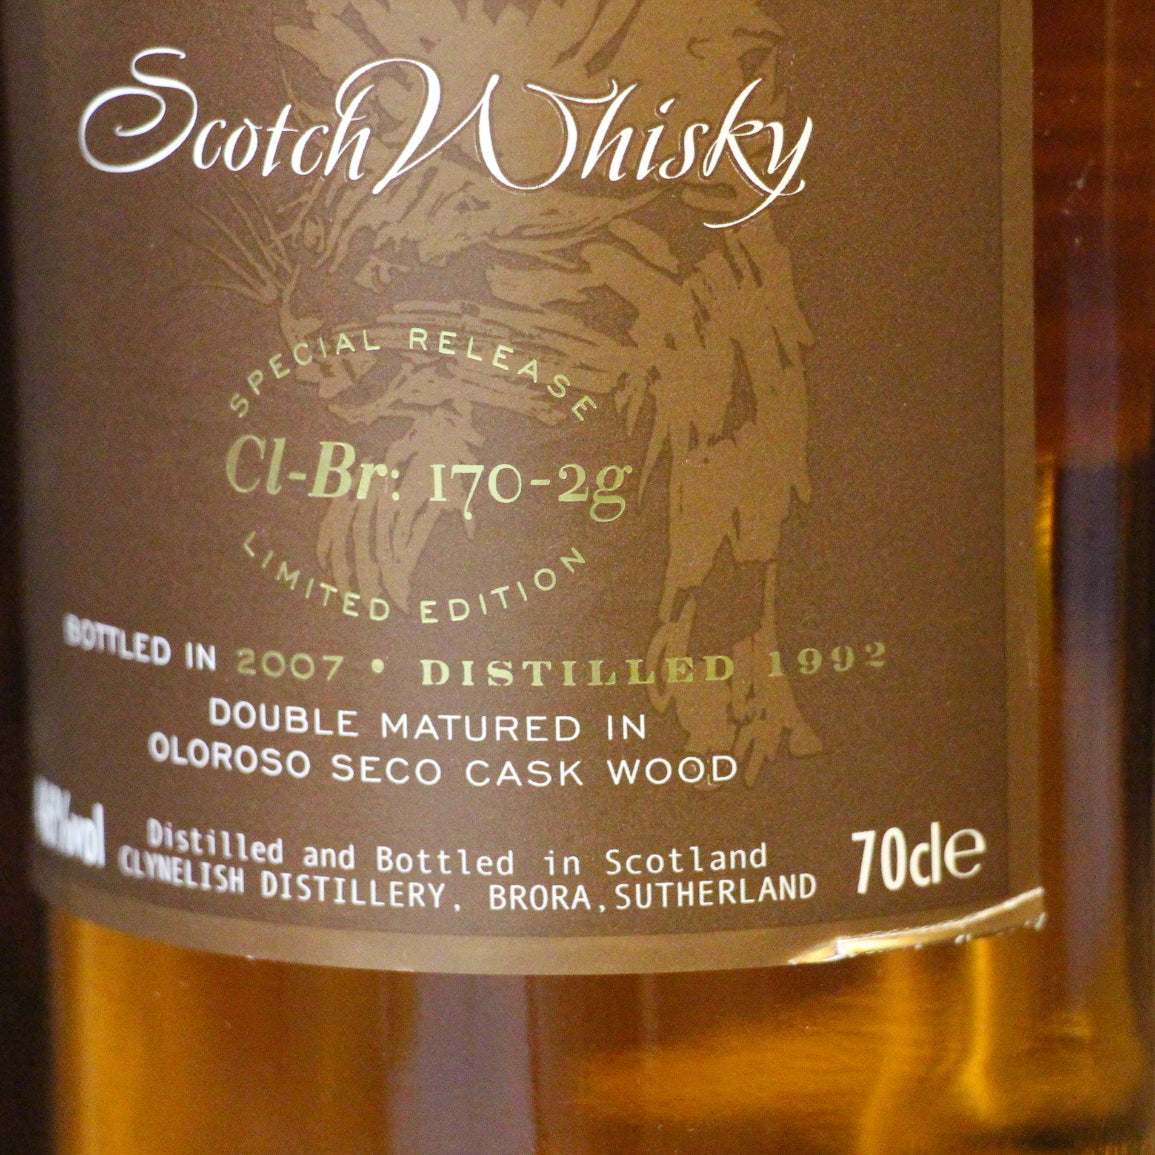 Double matured in Oloroso Seco Cask Wood, after its initial maturation this Clynelish is a limited edition/special release bottled in 2007. Velvety, beeswax, honey, soft and creamy vanilla. Rated 85+ on Whiskybase across 158 votes.